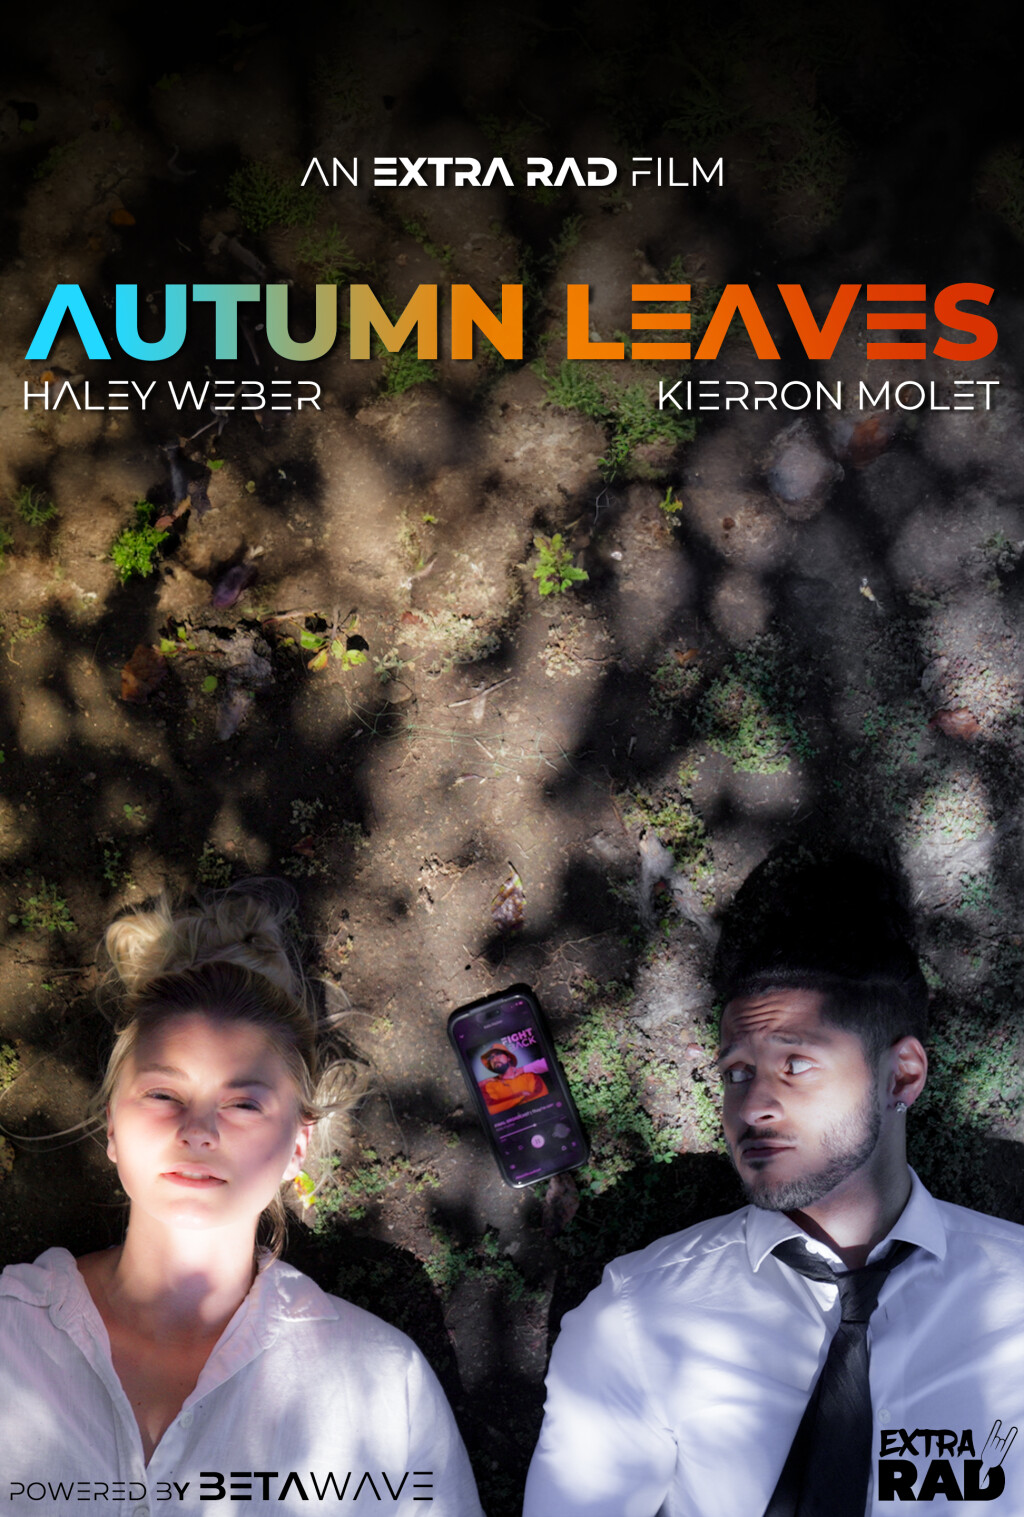 Filmposter for Autumn Leaves